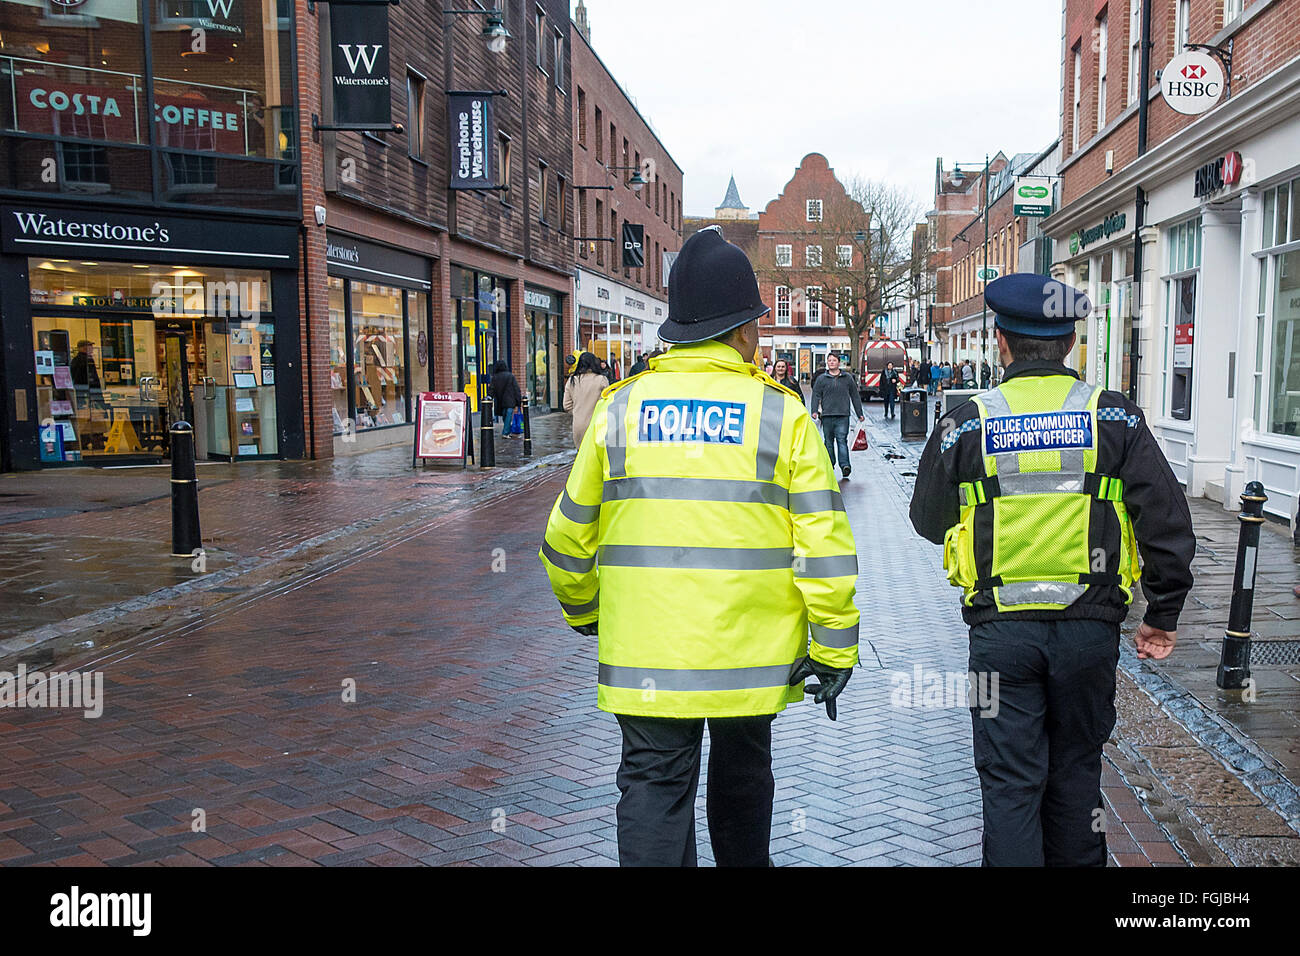 Police Officer and Police Community Support Officer on Foot Patrol Stock Photo